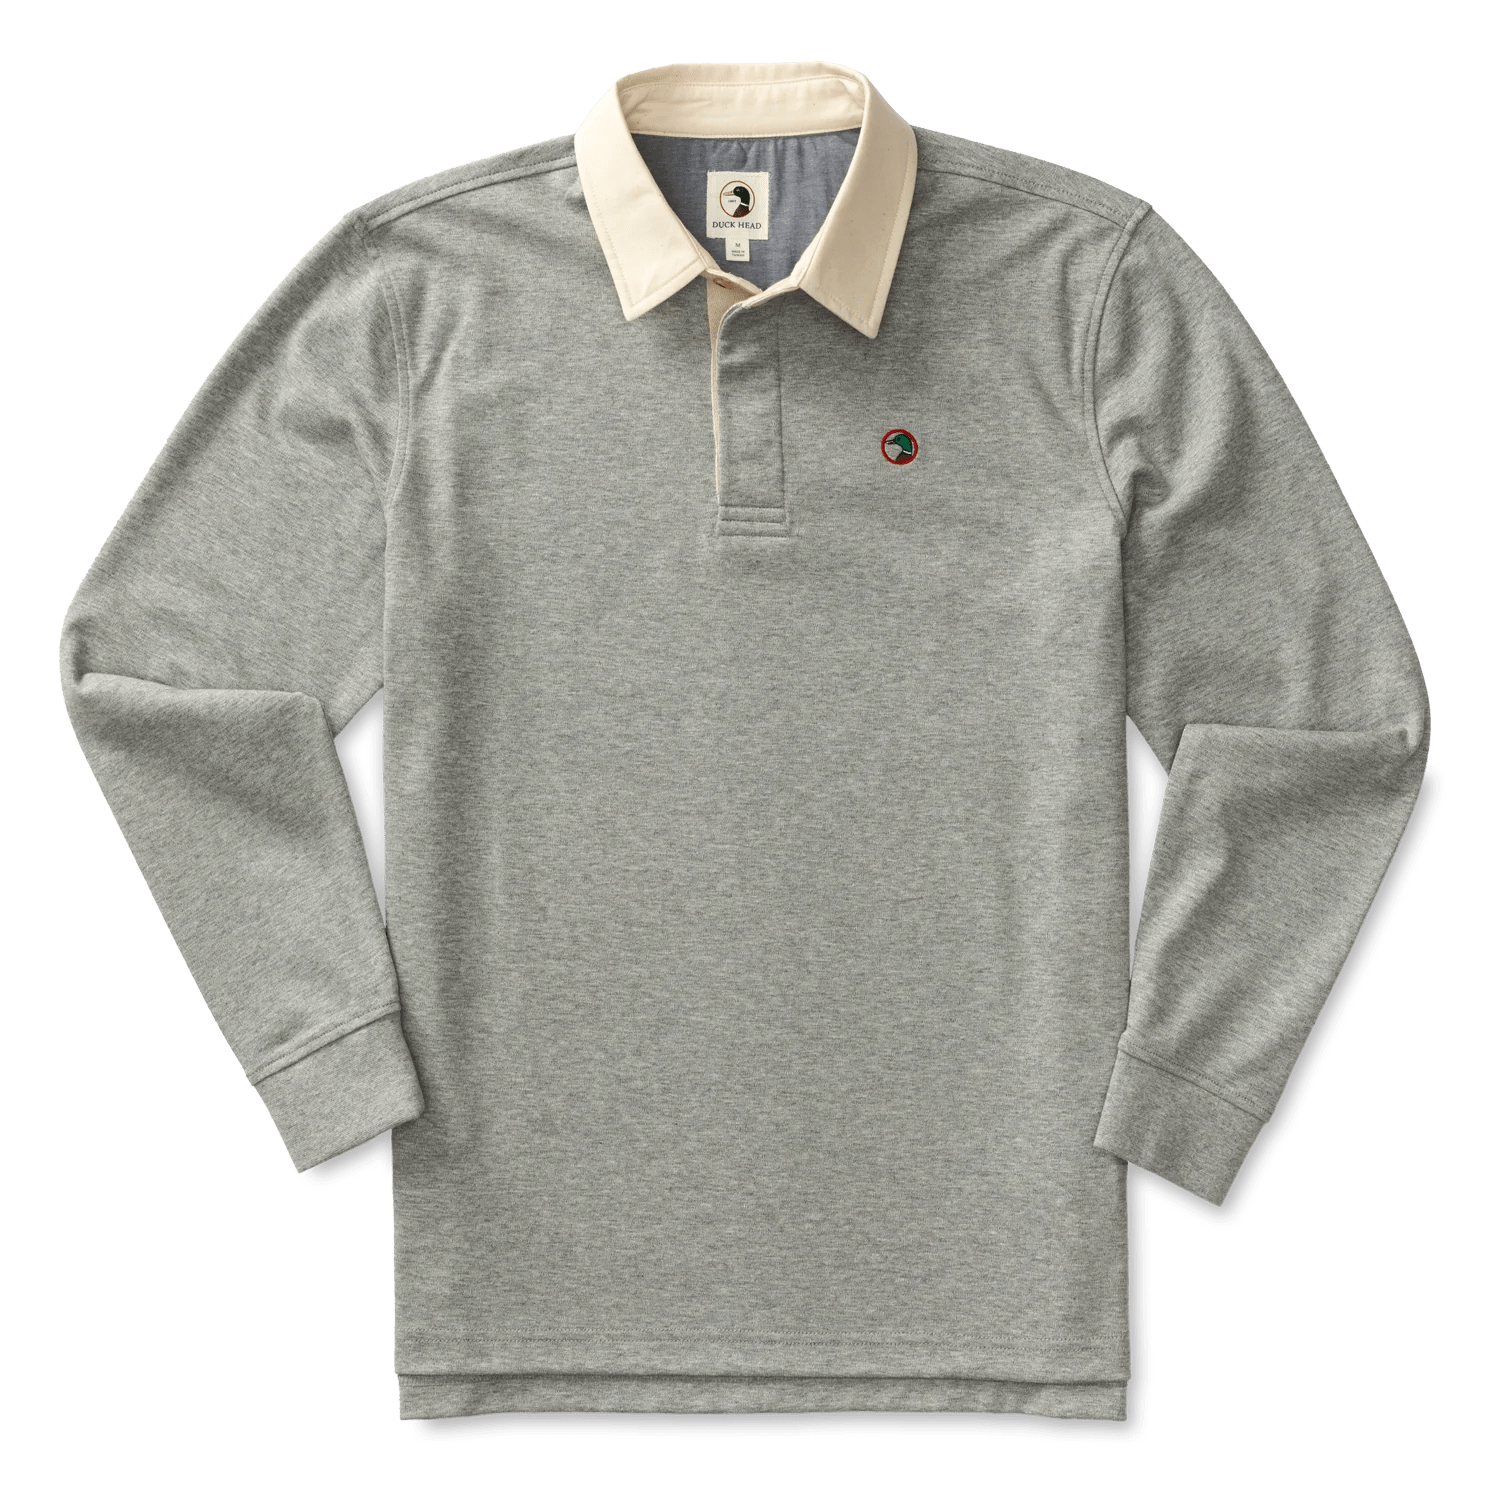 Men's The Iconic Rugby Shirt